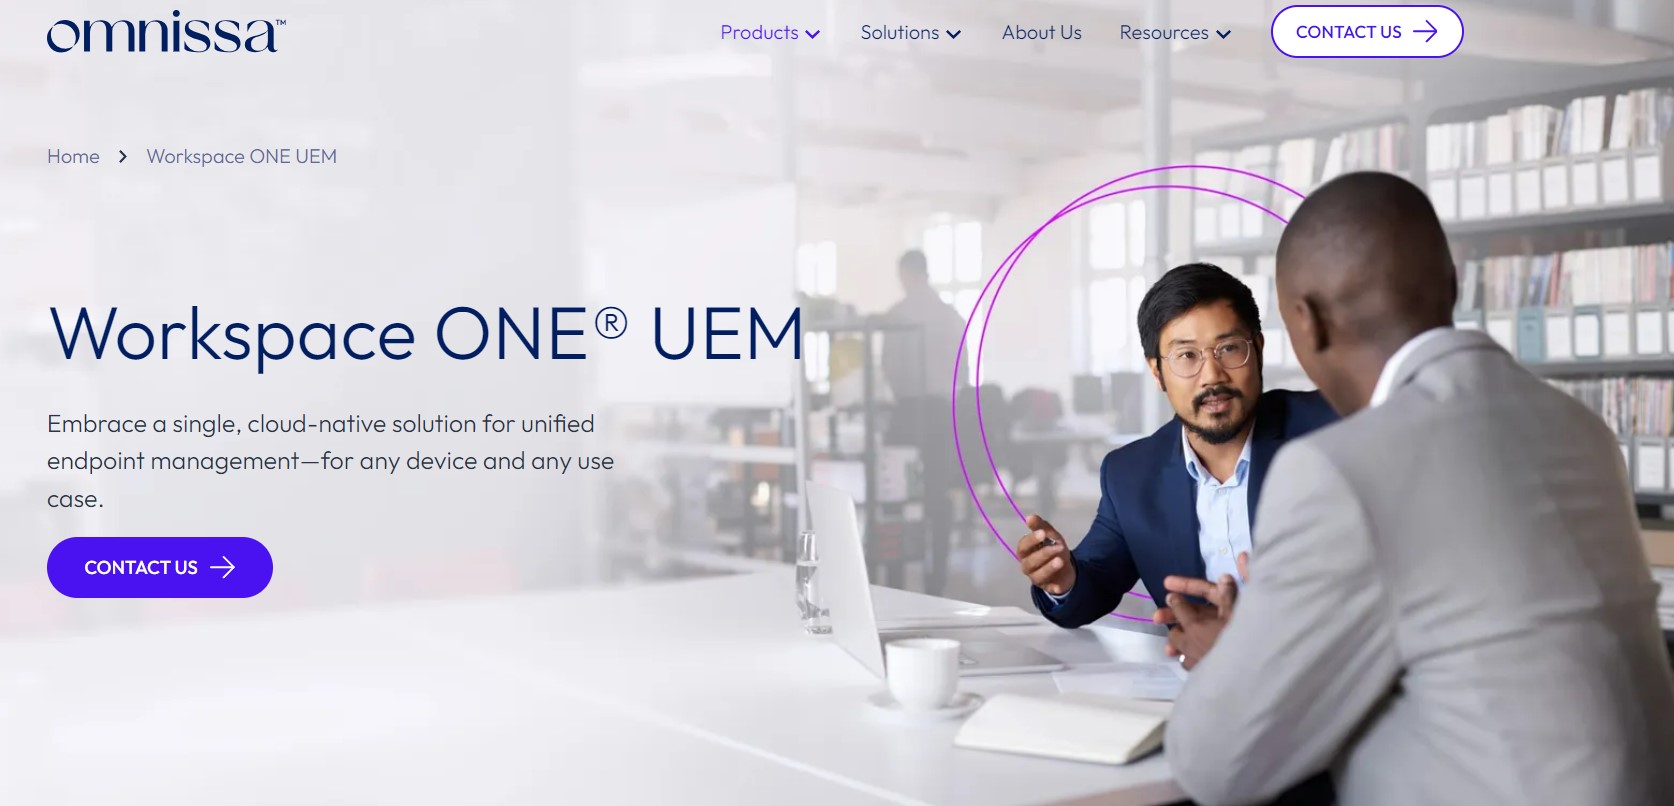 A webpage for Omnissa Workspace ONE UEM, featuring the tagline "Embrace a single, cloud-native solution for unified endpoint management—for any device and any use case." The page has a "Contact Us" button and shows an image of two professionals having a discussion in a modern office setting. The navigation bar includes options for Products, Solutions, About Us, Resources, and a prominent "Contact Us" button. 